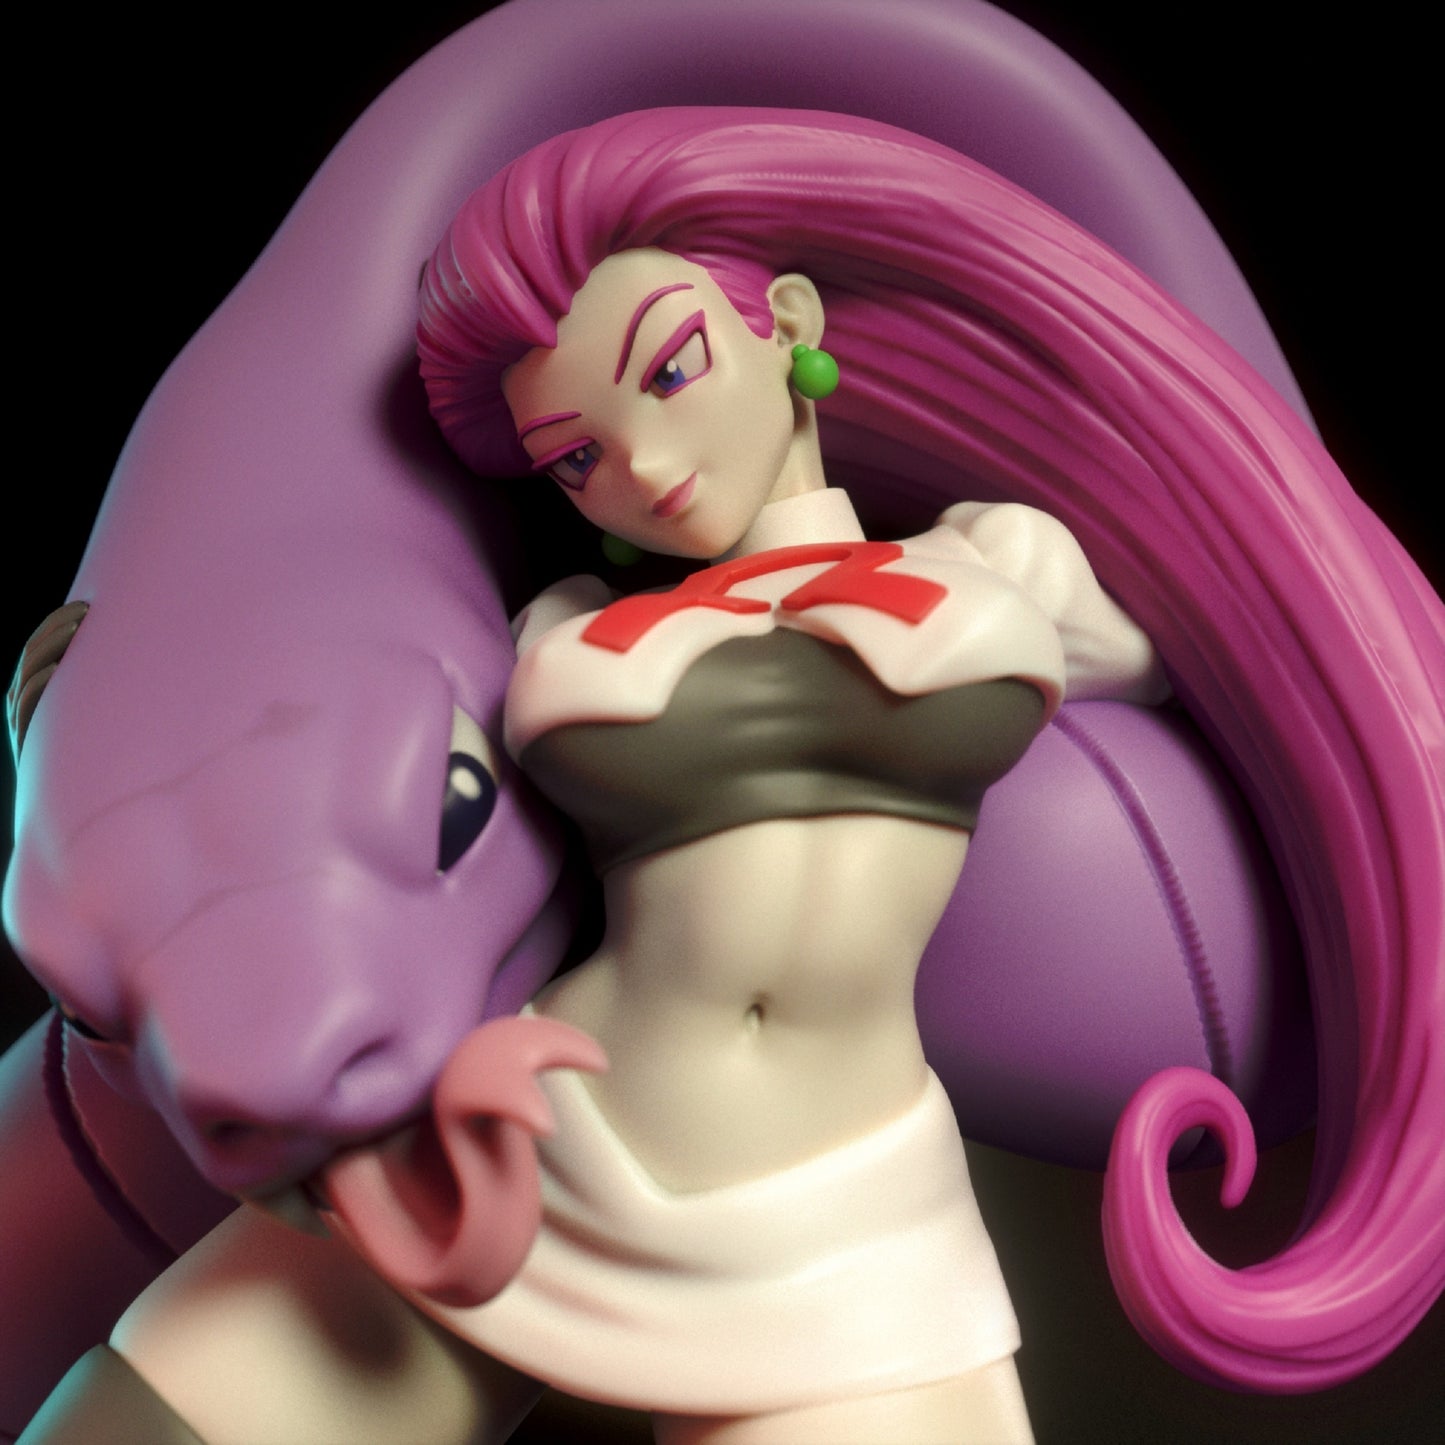 Fanart Trainer and Serpent Pinup Statuette